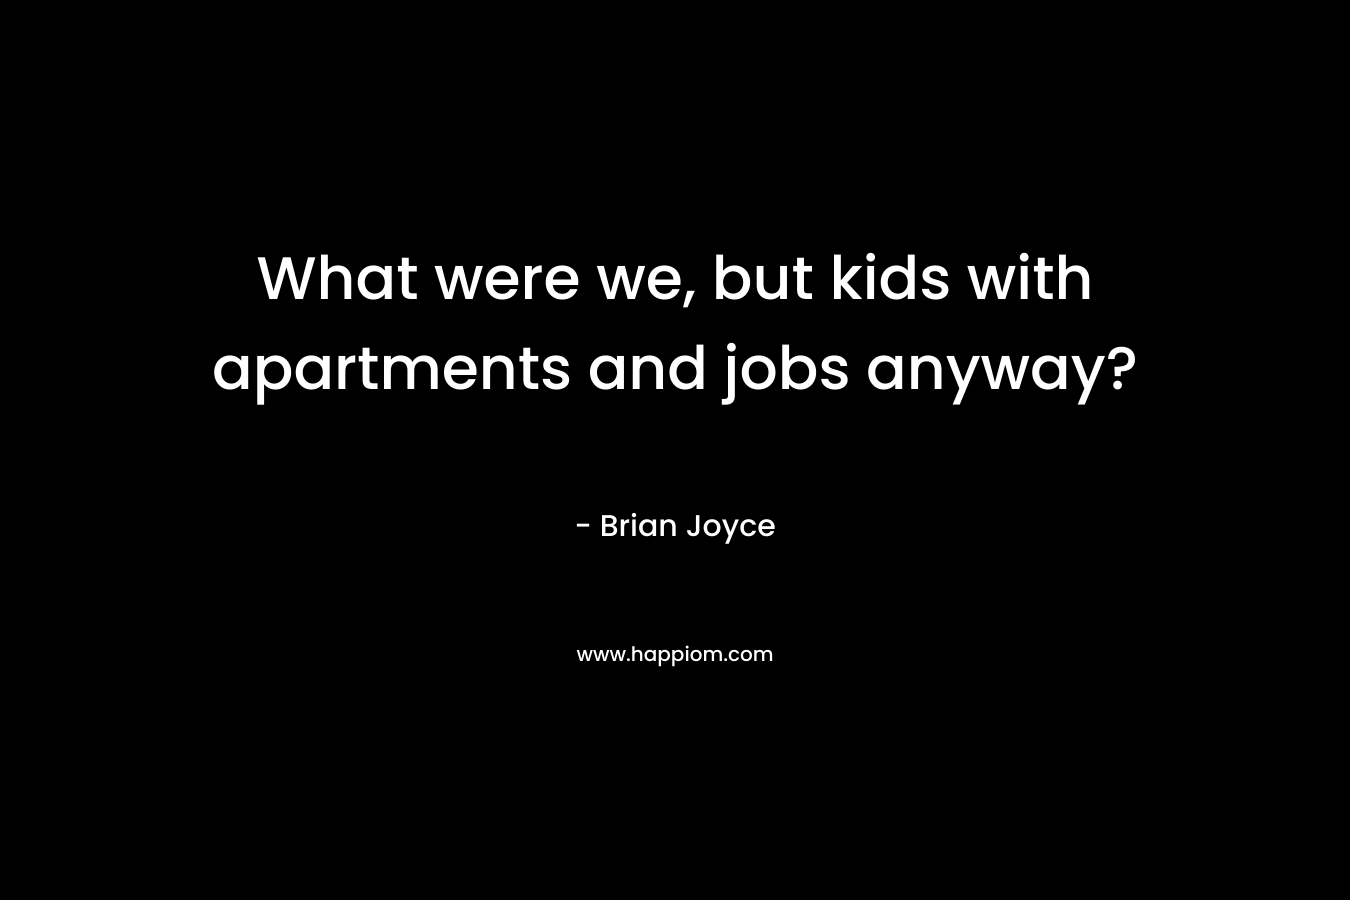 What were we, but kids with apartments and jobs anyway?